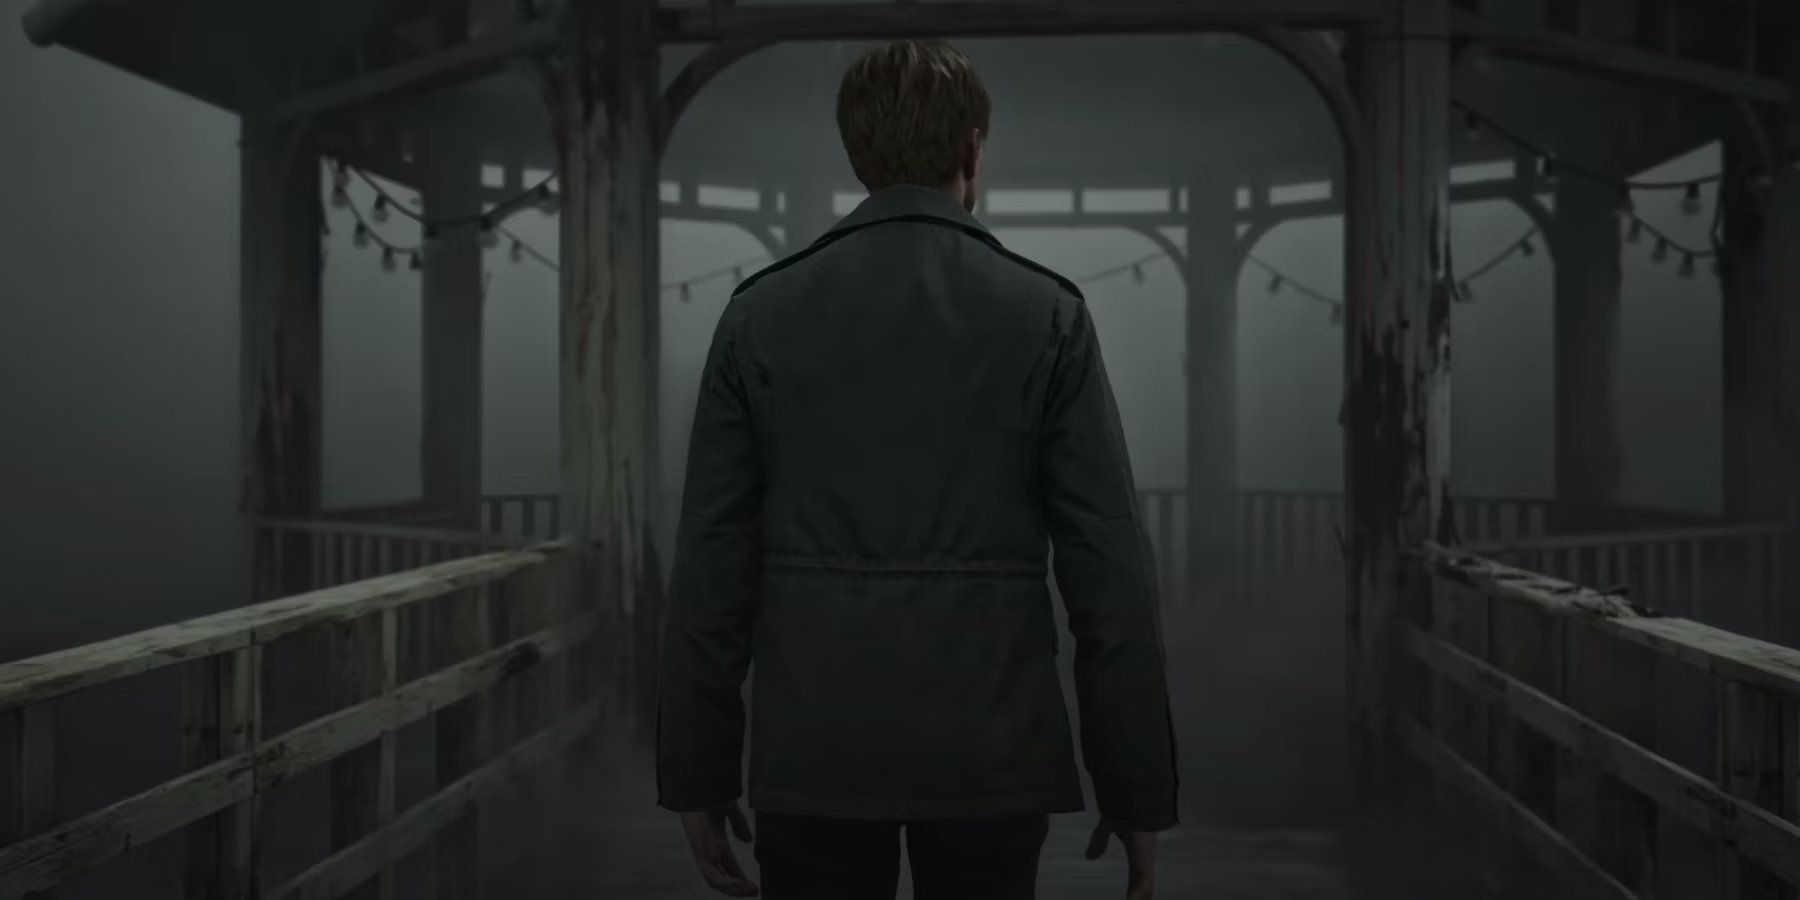 Return to Silent Hill Release Date Rumors: When is It Coming Out?